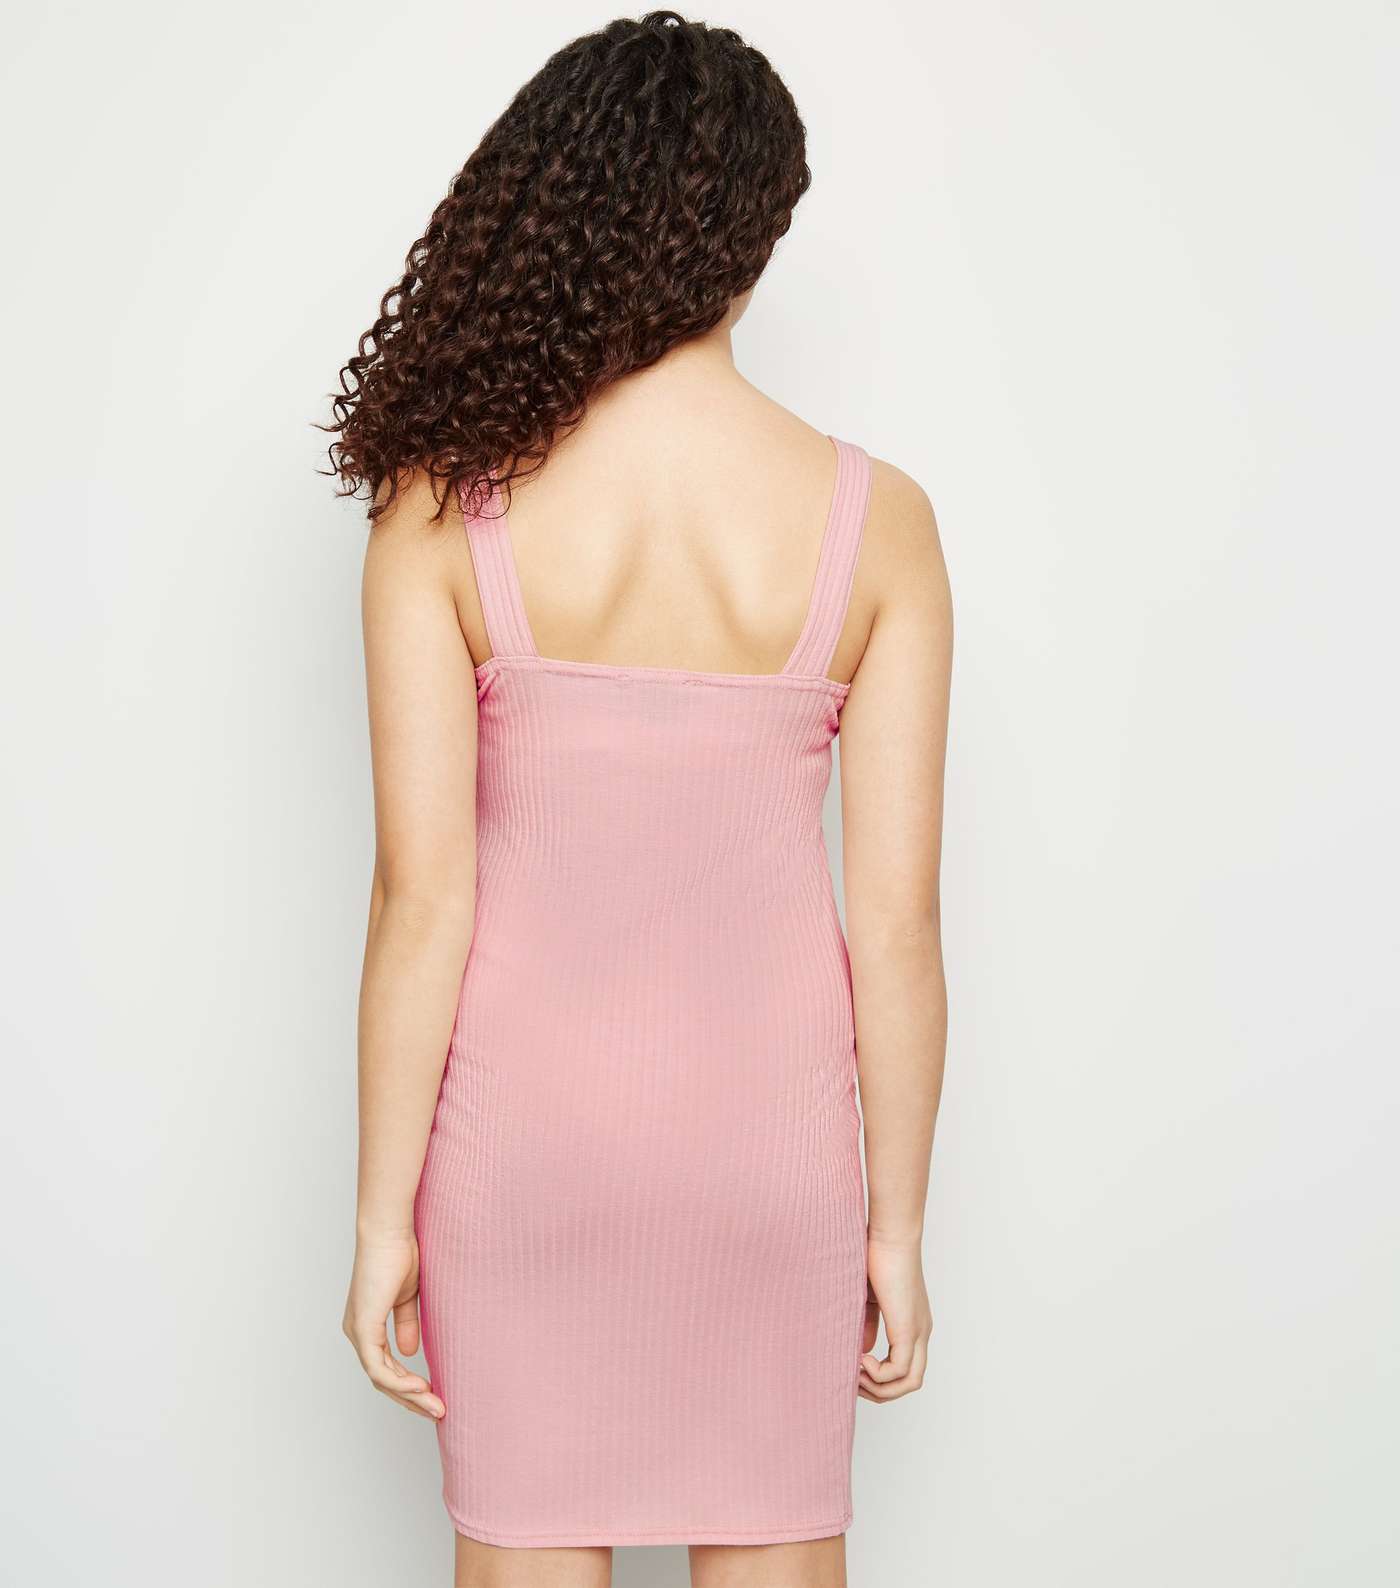 Girls Pale Pink Zip Front Bodycon Dress  Image 3